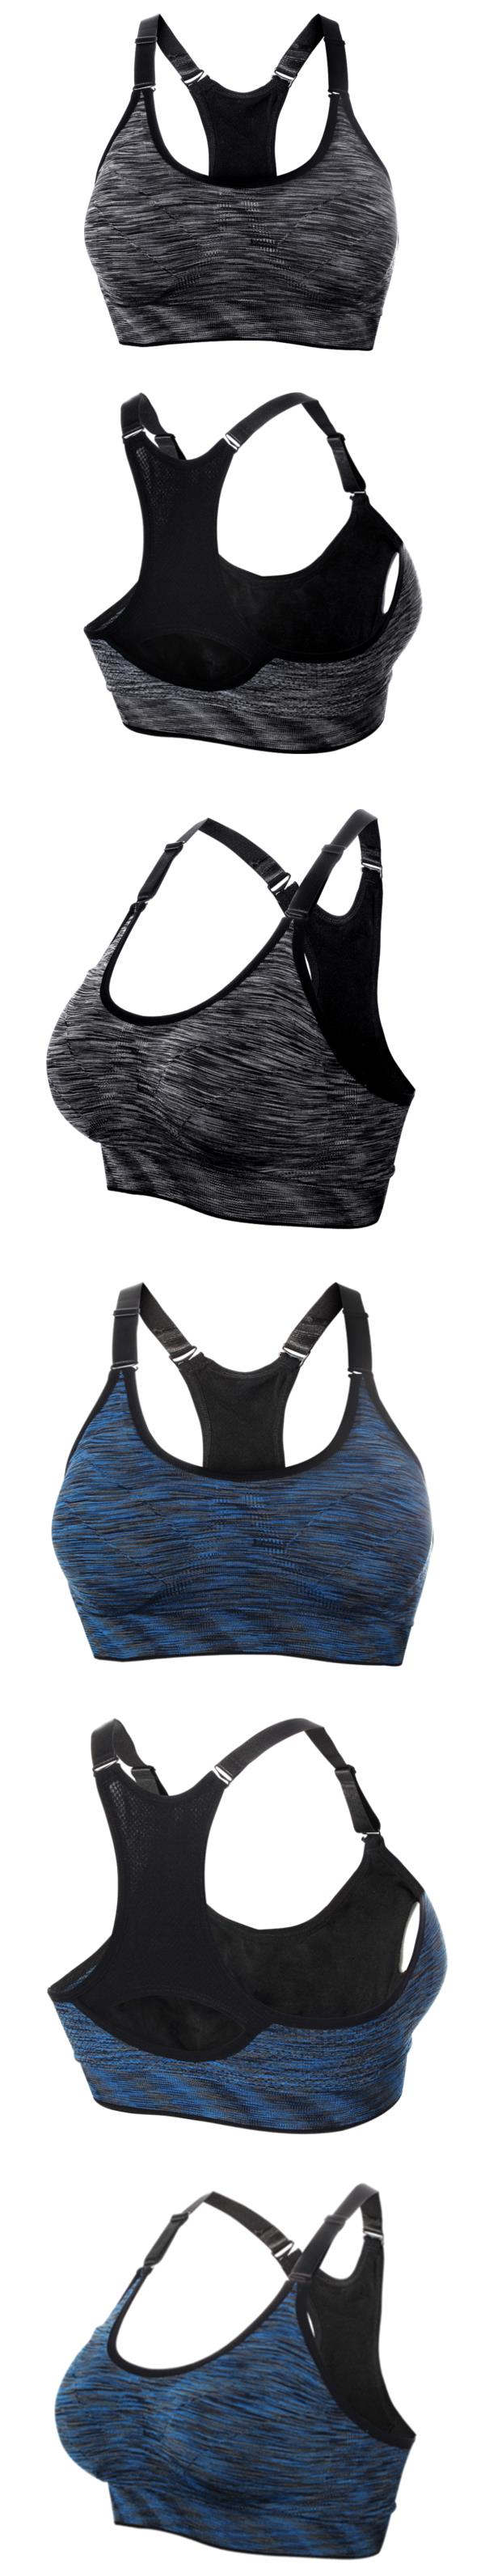 Women-Space-Dyeing-Wireless-Bra-Shakeproof-Stretch-Push-Up-Bras-Top-Seamless-Padded-Vest-1070058-1